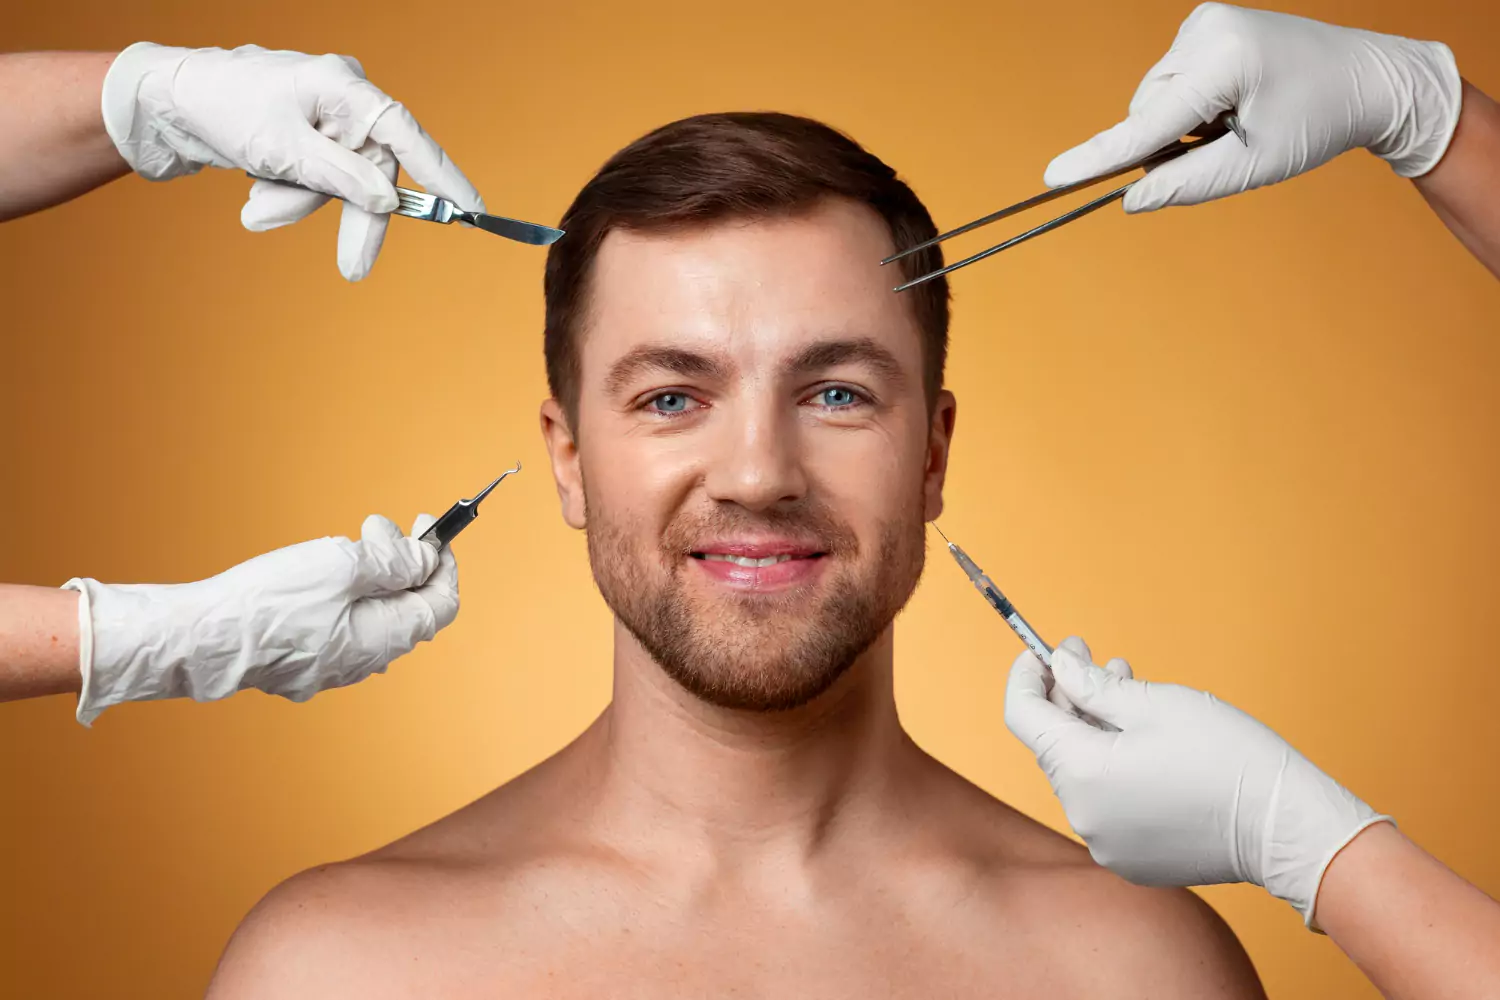 Men and Botox: Why More UK Men Are Choosing This Treatment